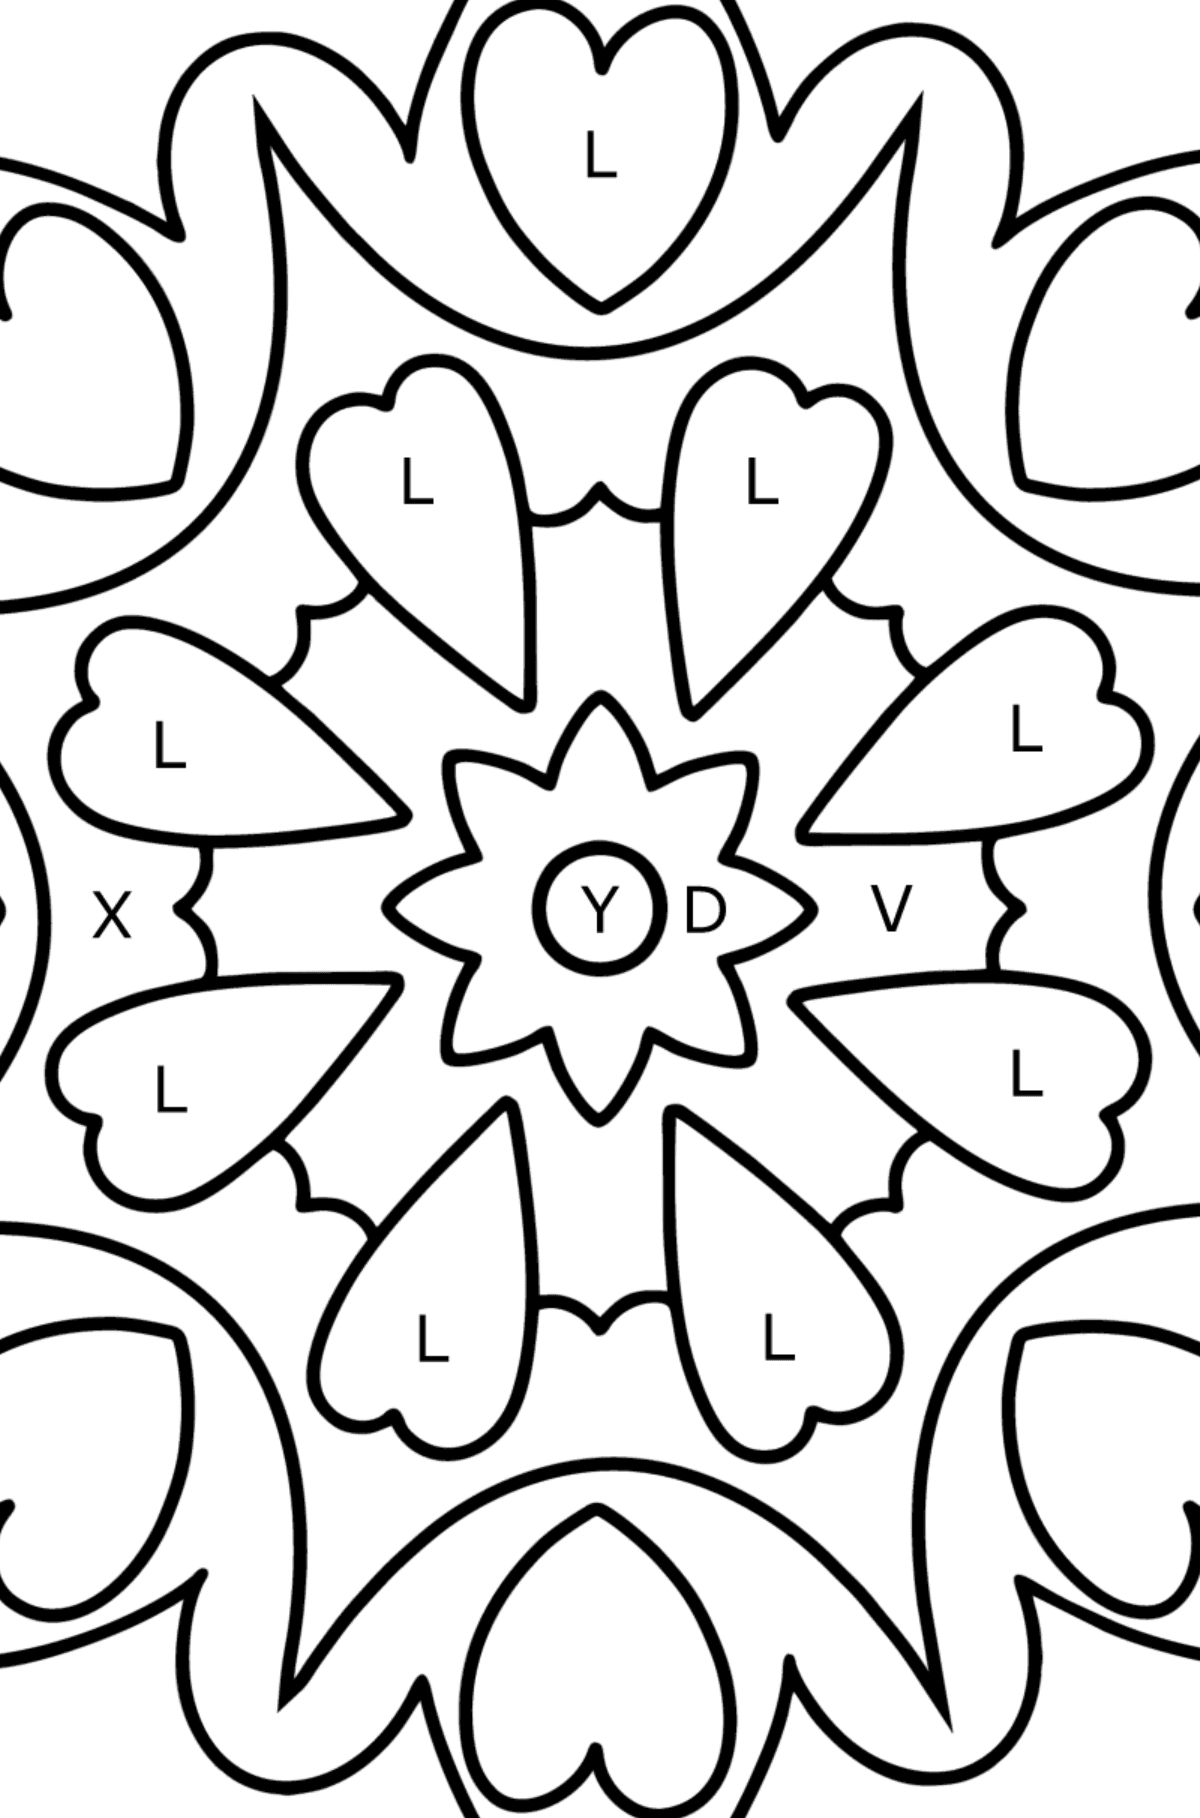 Mandala coloring page - 21 elements - Coloring by Letters for Kids